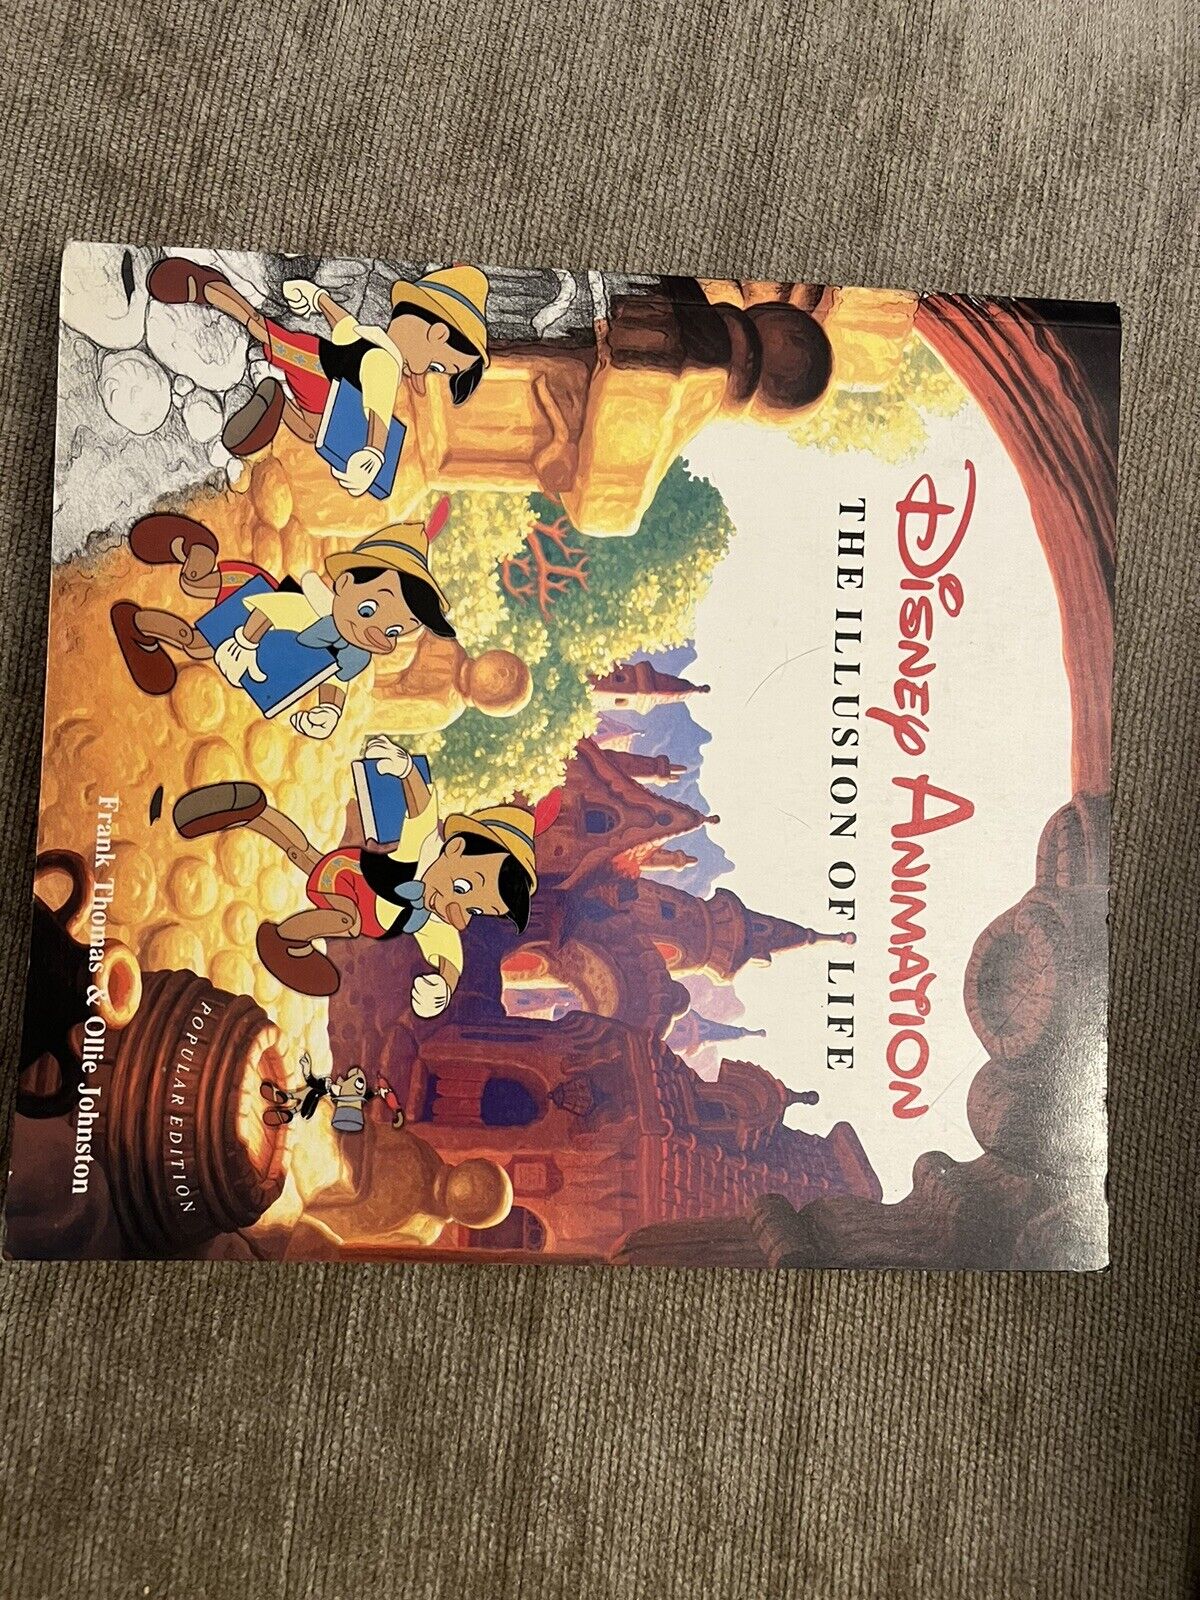 DISNEY ANIMATION, THE ILLUSION OF LIFE POPULAR EDITION 1984 SOFTCOVER